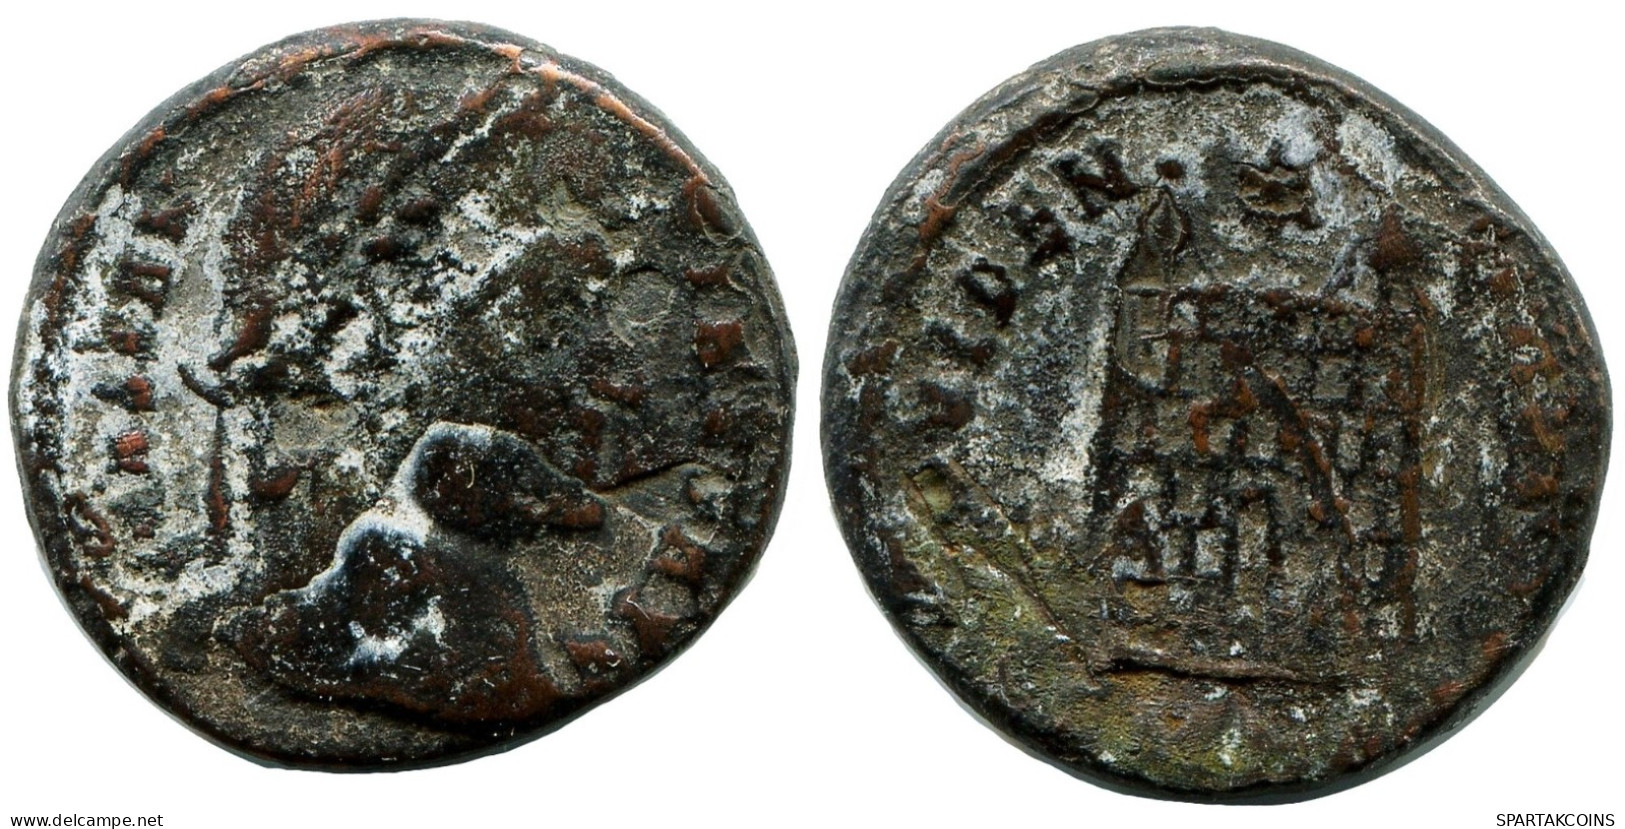 CONSTANTINE I MINTED IN CYZICUS FROM THE ROYAL ONTARIO MUSEUM #ANC10978.14.D.A - The Christian Empire (307 AD To 363 AD)